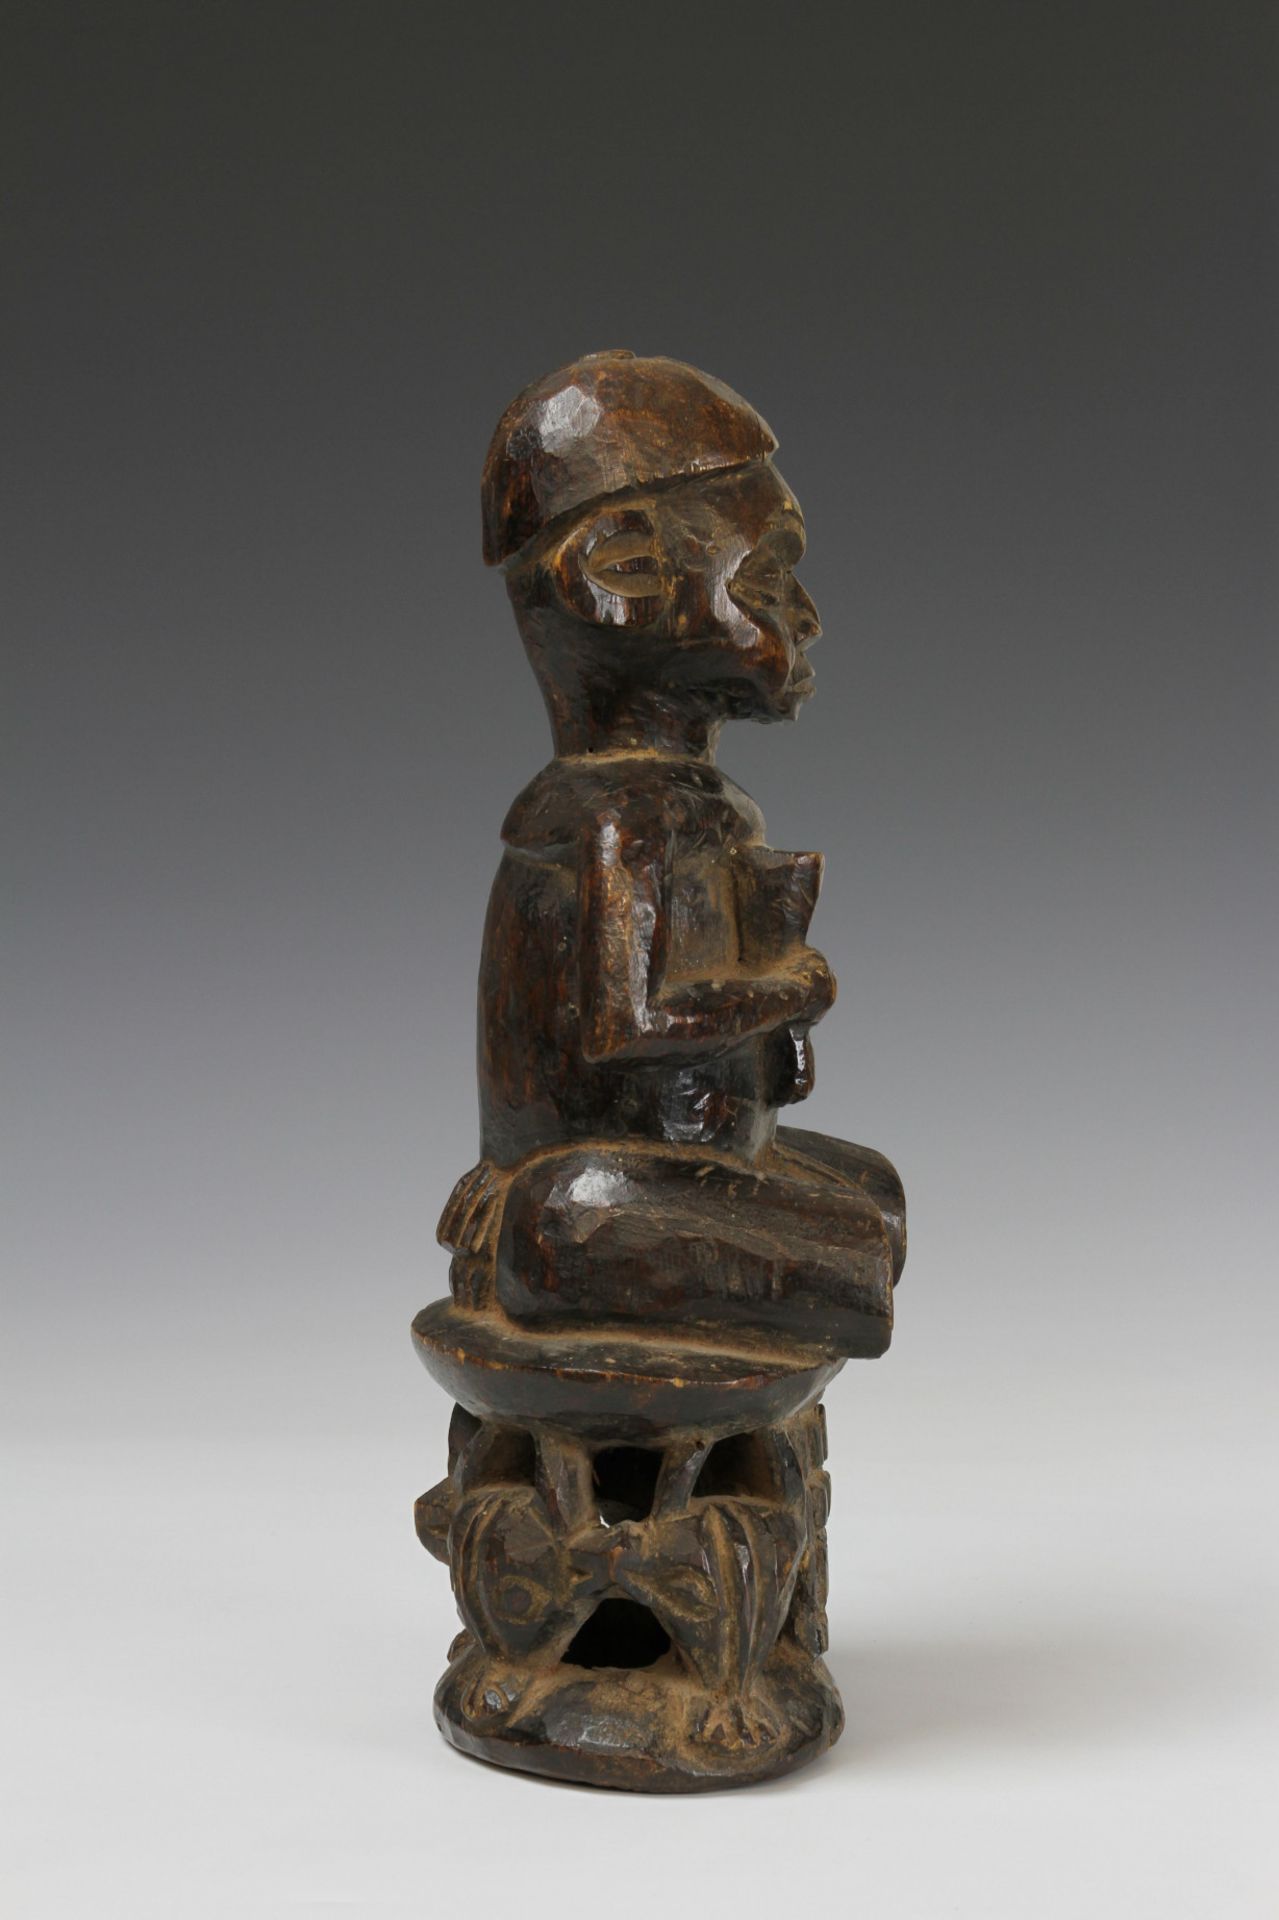 Cameroon, Grass lands, seated figure on a throne with buffalo heads - Image 2 of 5